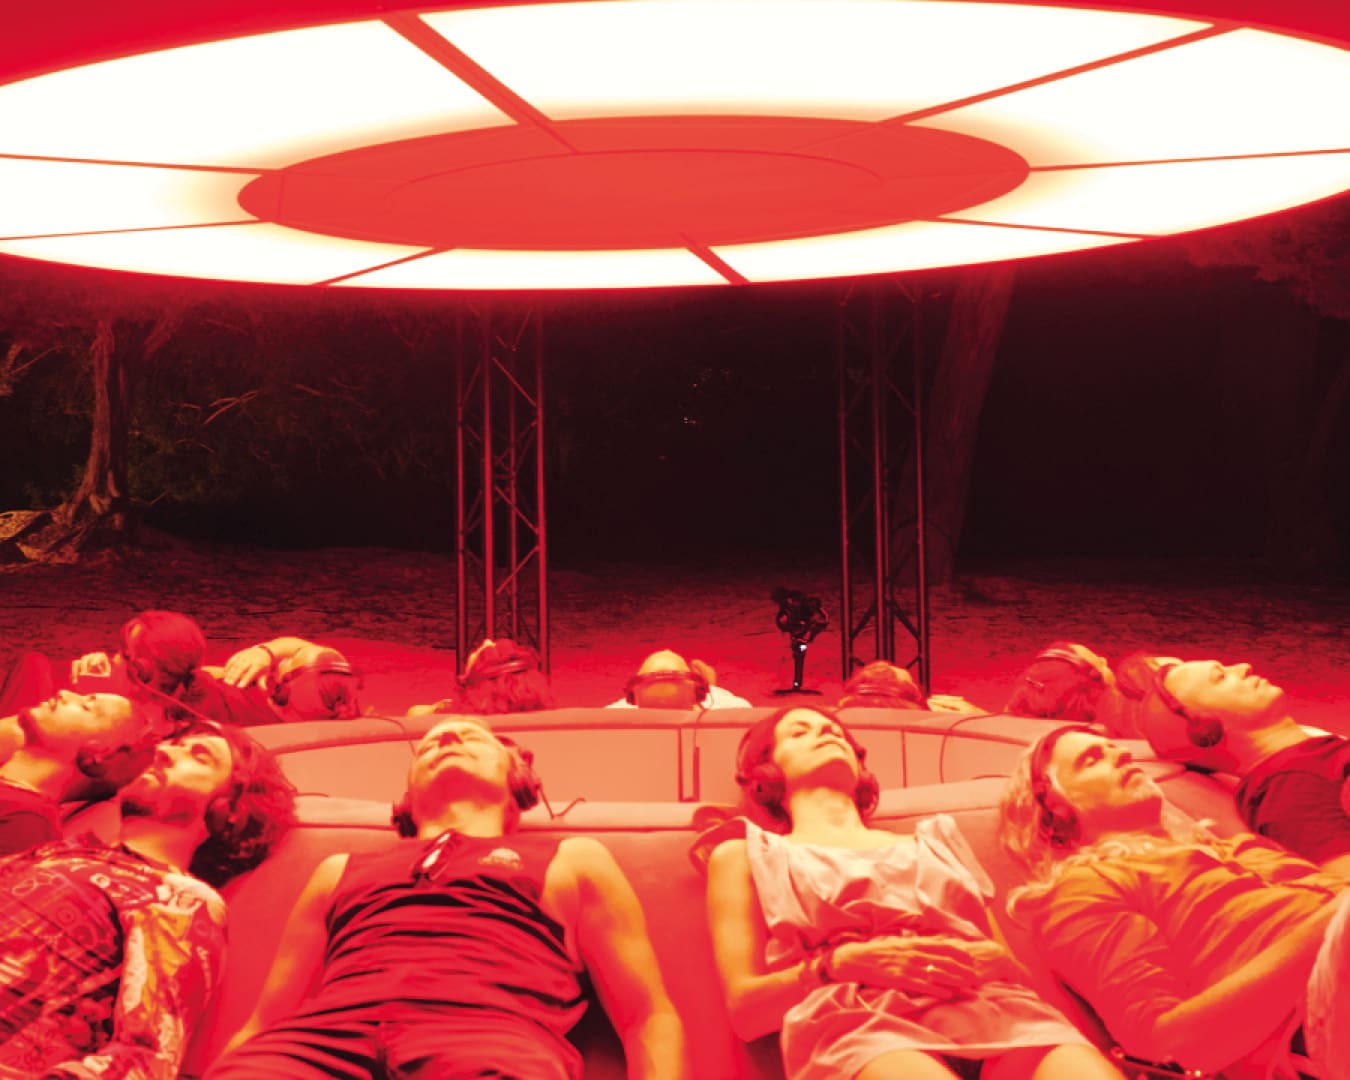 People mediate beneath infrared light at Glow Festival in Singapore